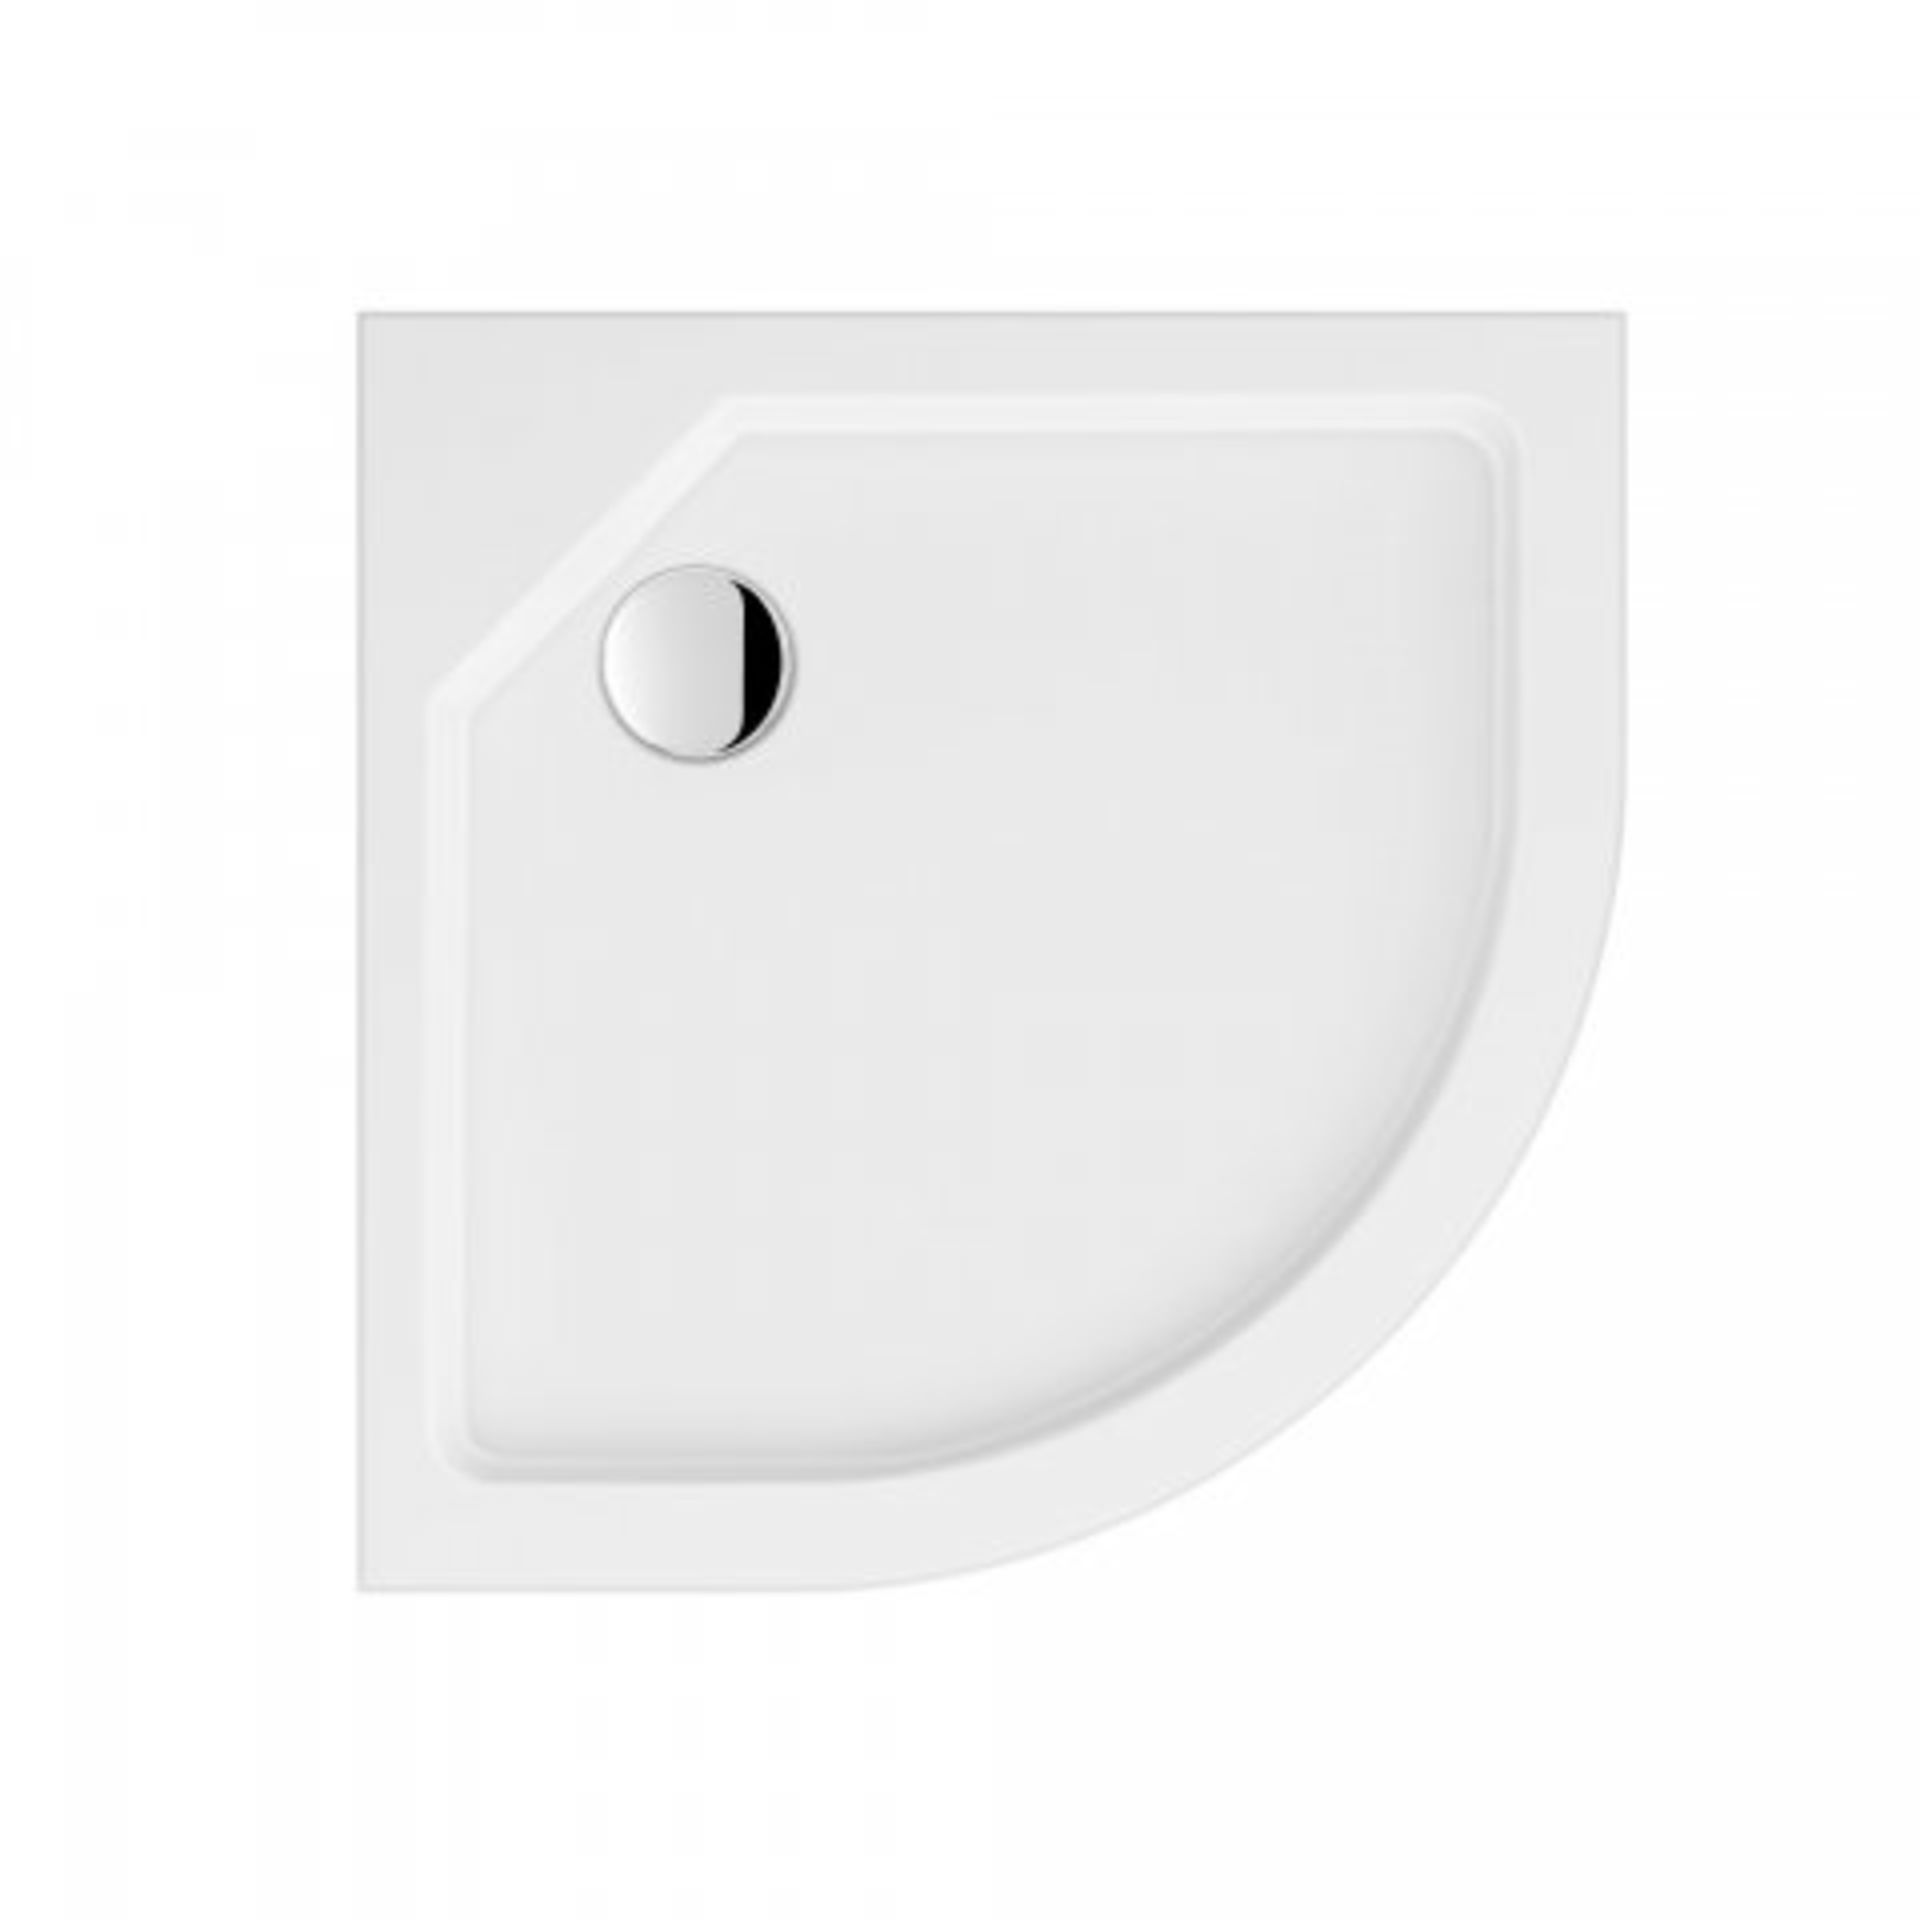 (O242) 800x800mm Quadrant Easy Plumb Shower Tray. Our brilliant white ultra slim trays look - Image 2 of 2